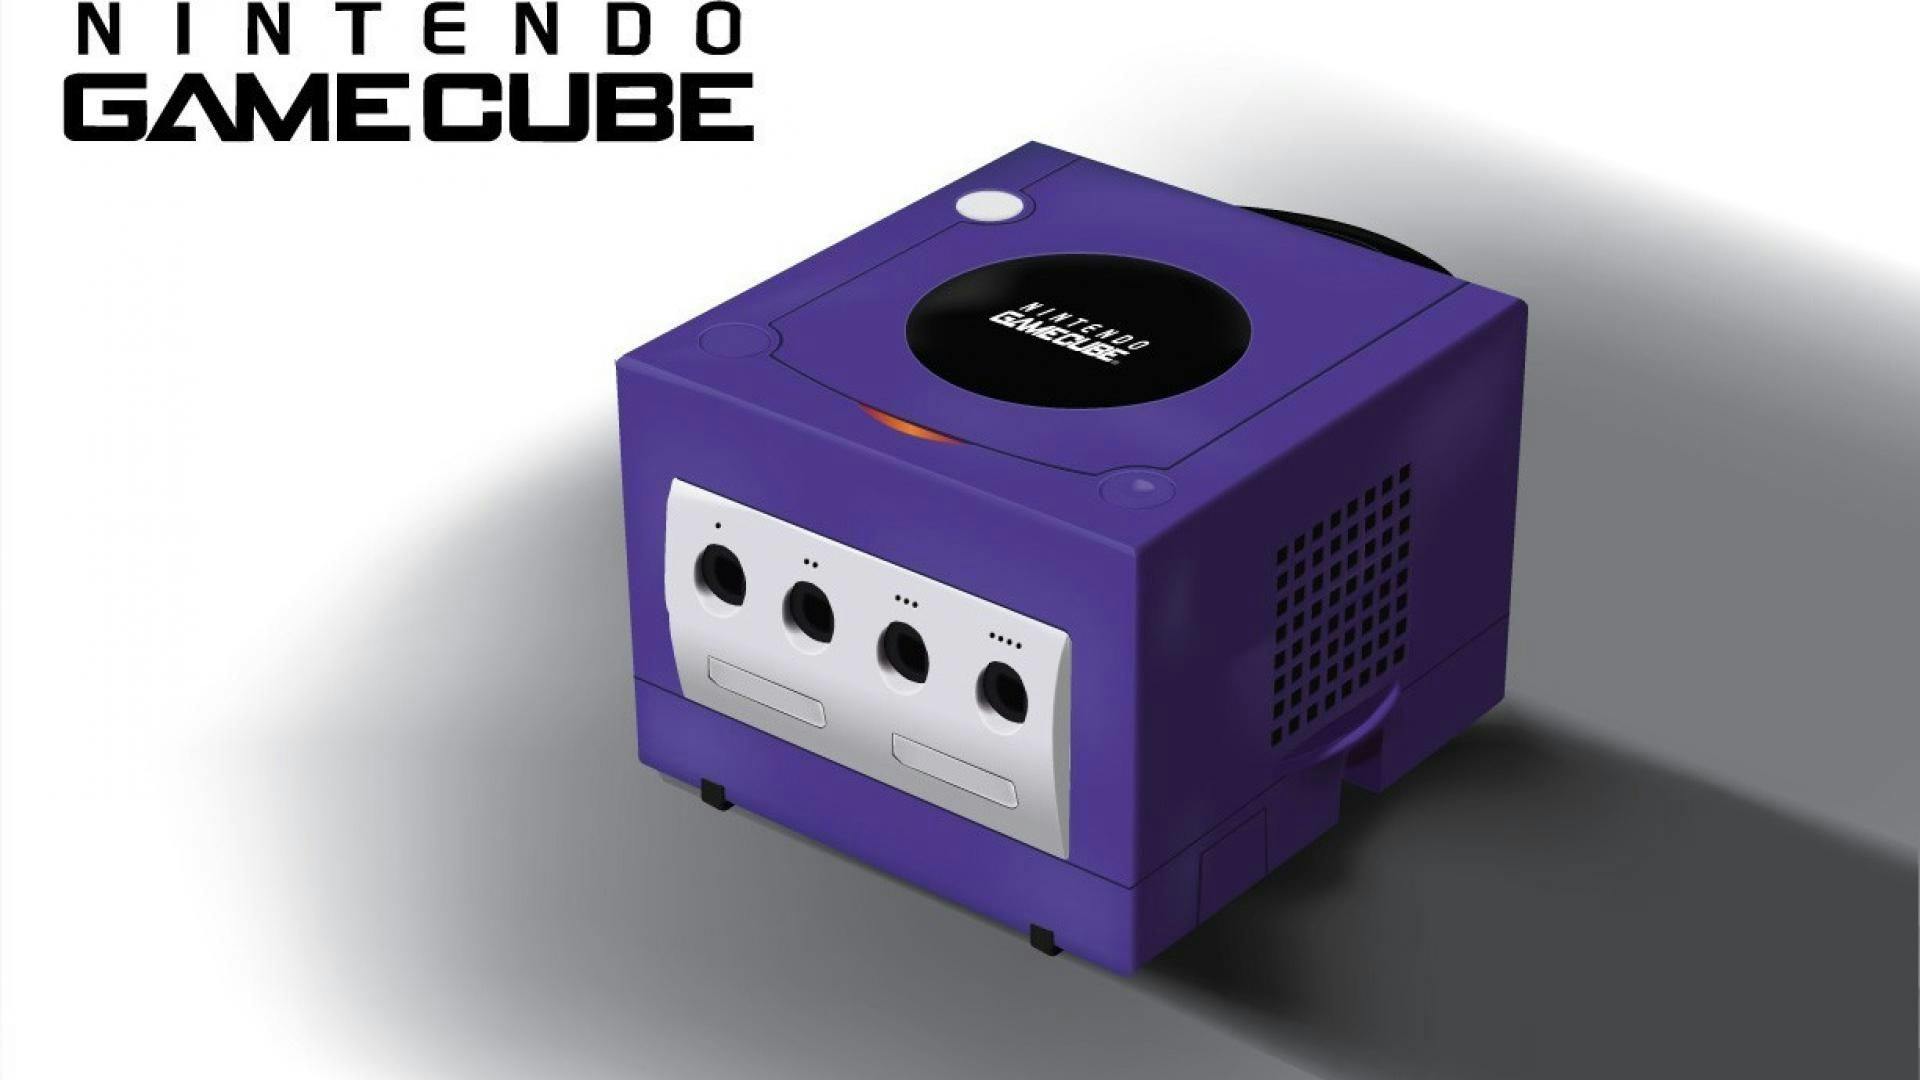 featured image - 10 Best GameCube Games of All Time Ranked by Sales